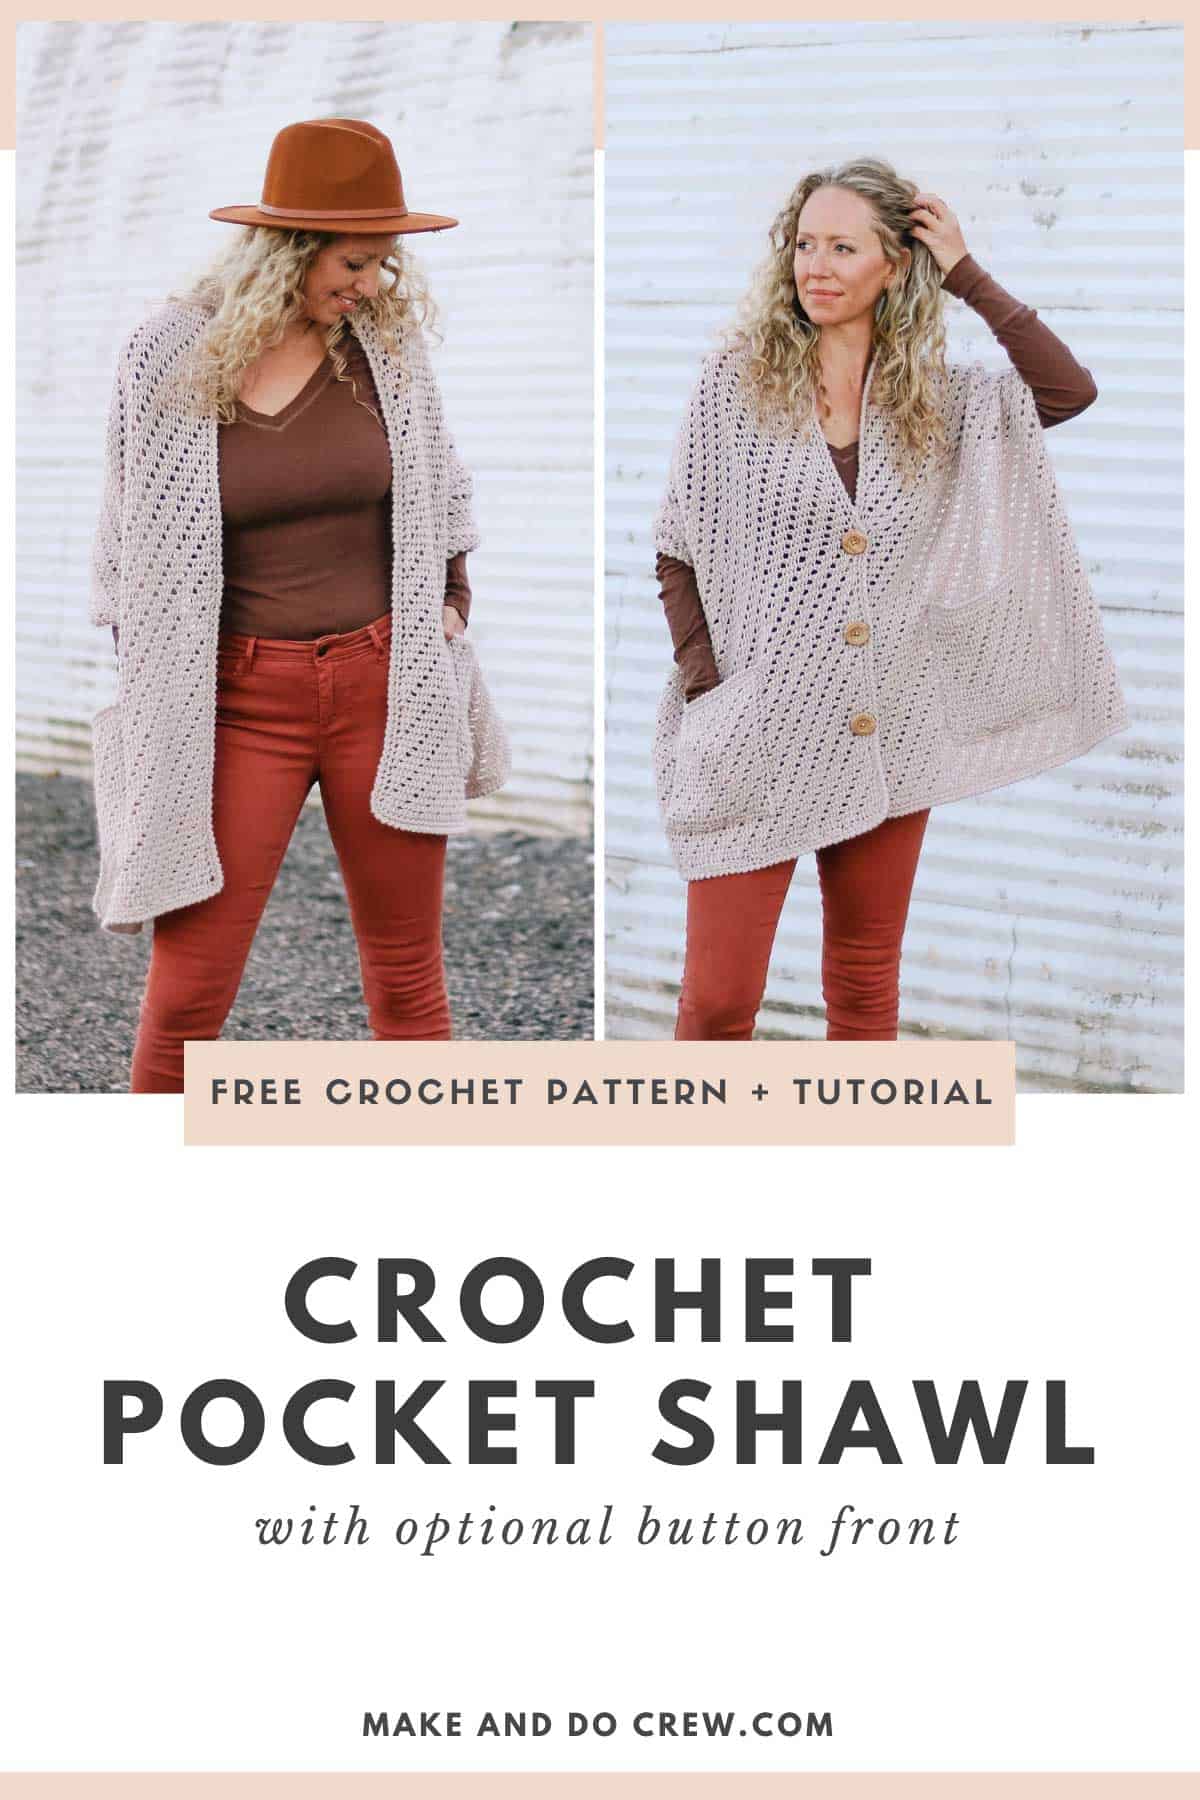 A grid showing two options for a crochet pocket shawl, one with a button-front poncho look and one without.